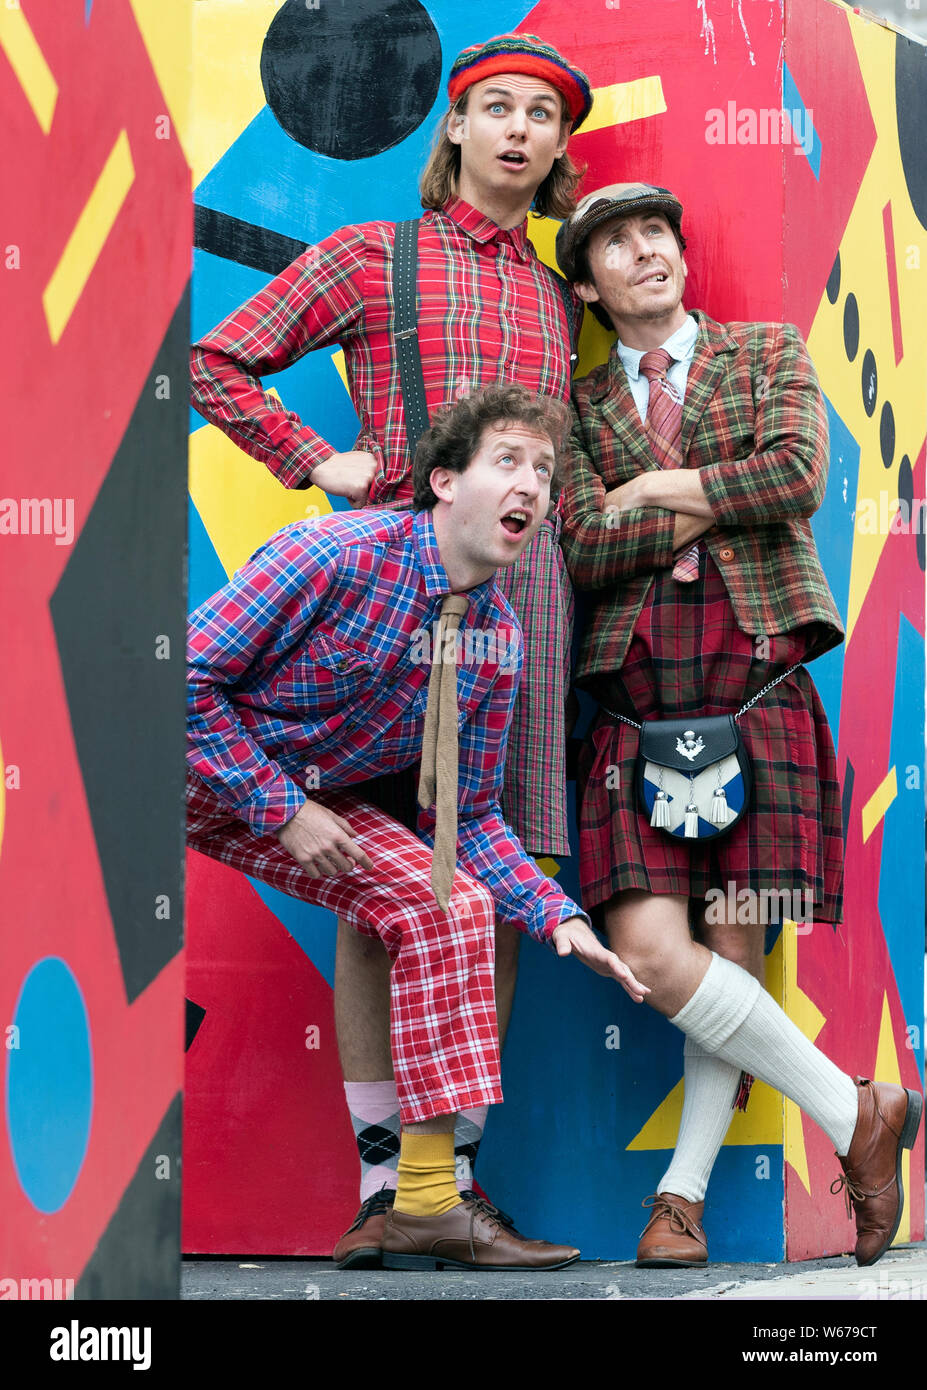 Performers (left to right) Jonathan Tilley, Oliver Nilsson and Sam Dugmore from the award-winning international comedy trio The Latebloomers pay tribute to all things truly Scottish in tartan costumes ahead of their Edinburgh Festival Fringe debut show 'Scotland!' at the Assembly Rooms, Edinburgh. Stock Photo